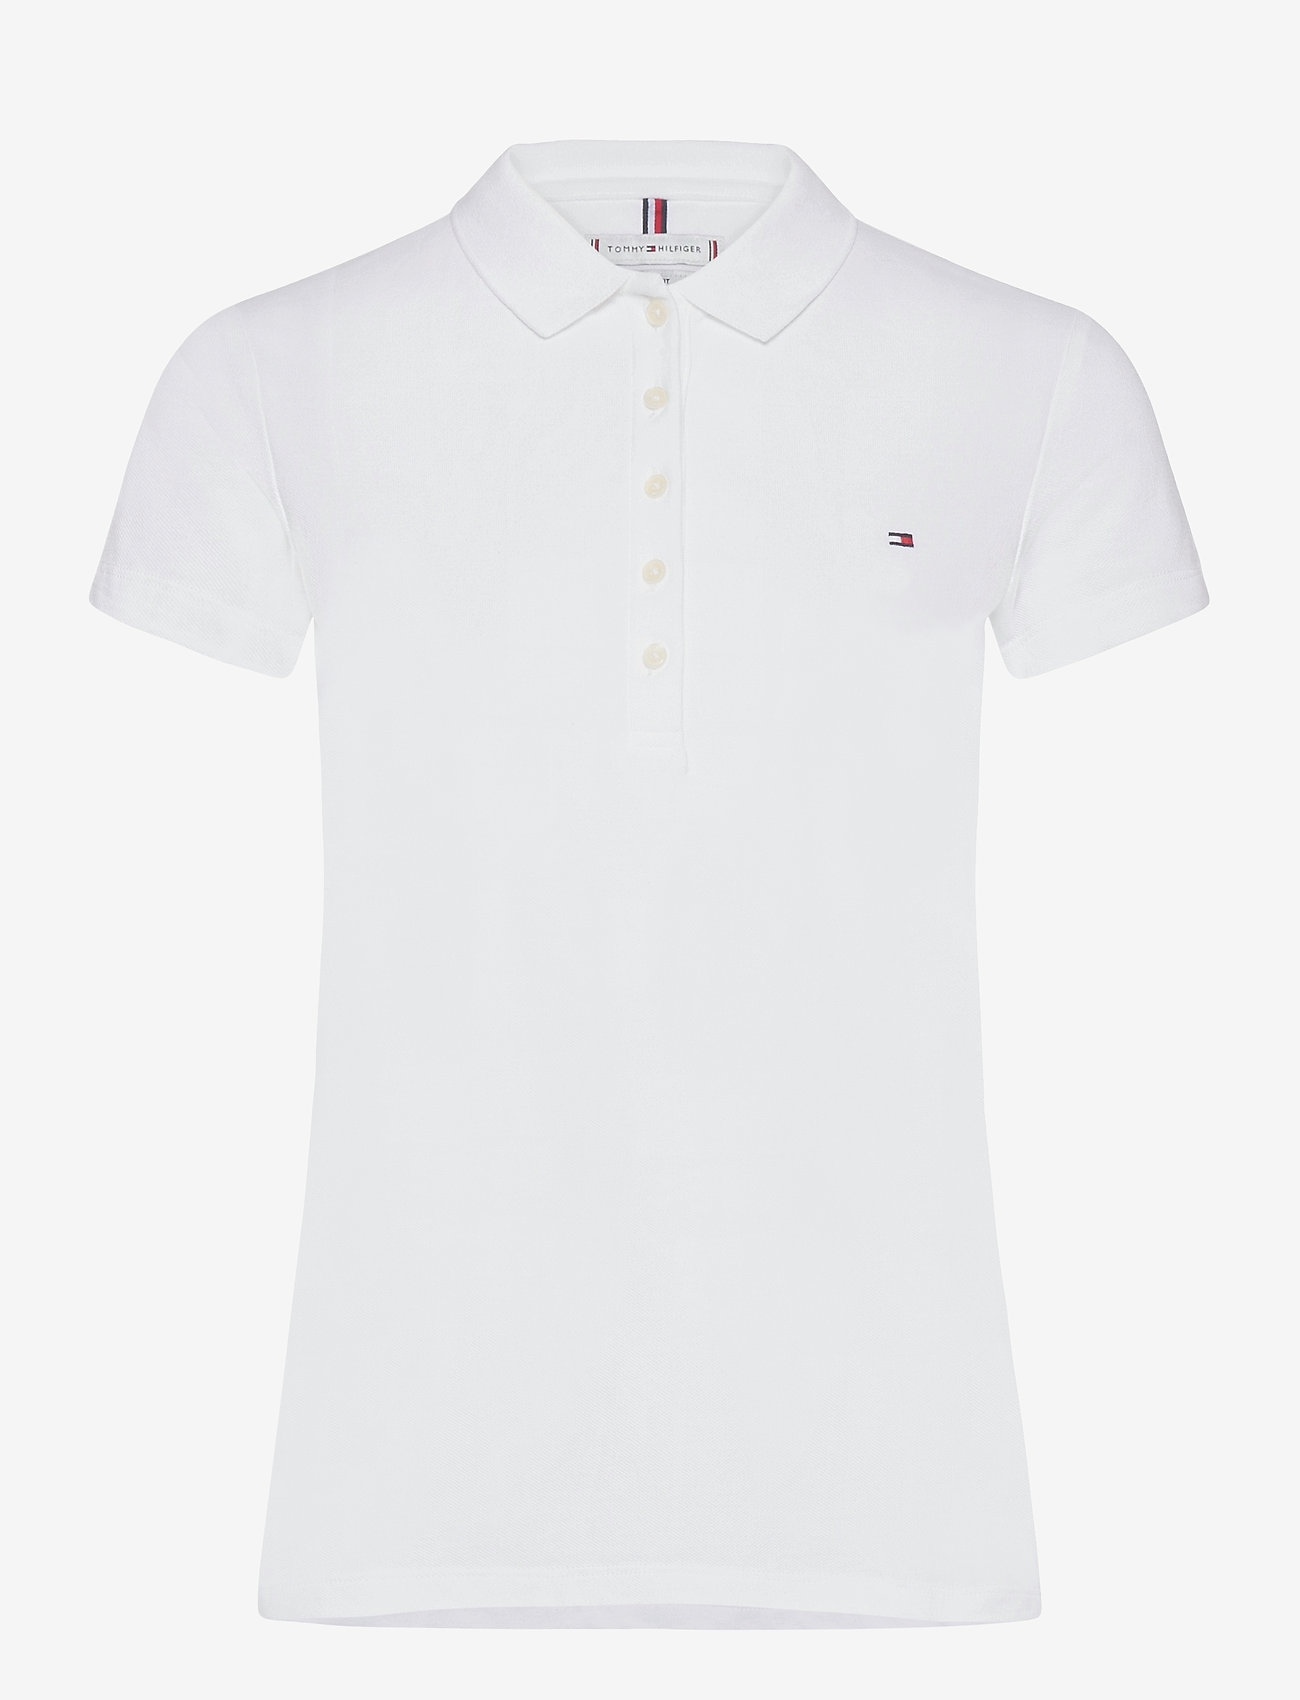 Tommy Hilfiger - HERITAGE SHORT SLEEVE SLIM POLO - pikeepaidat - classic white - 0